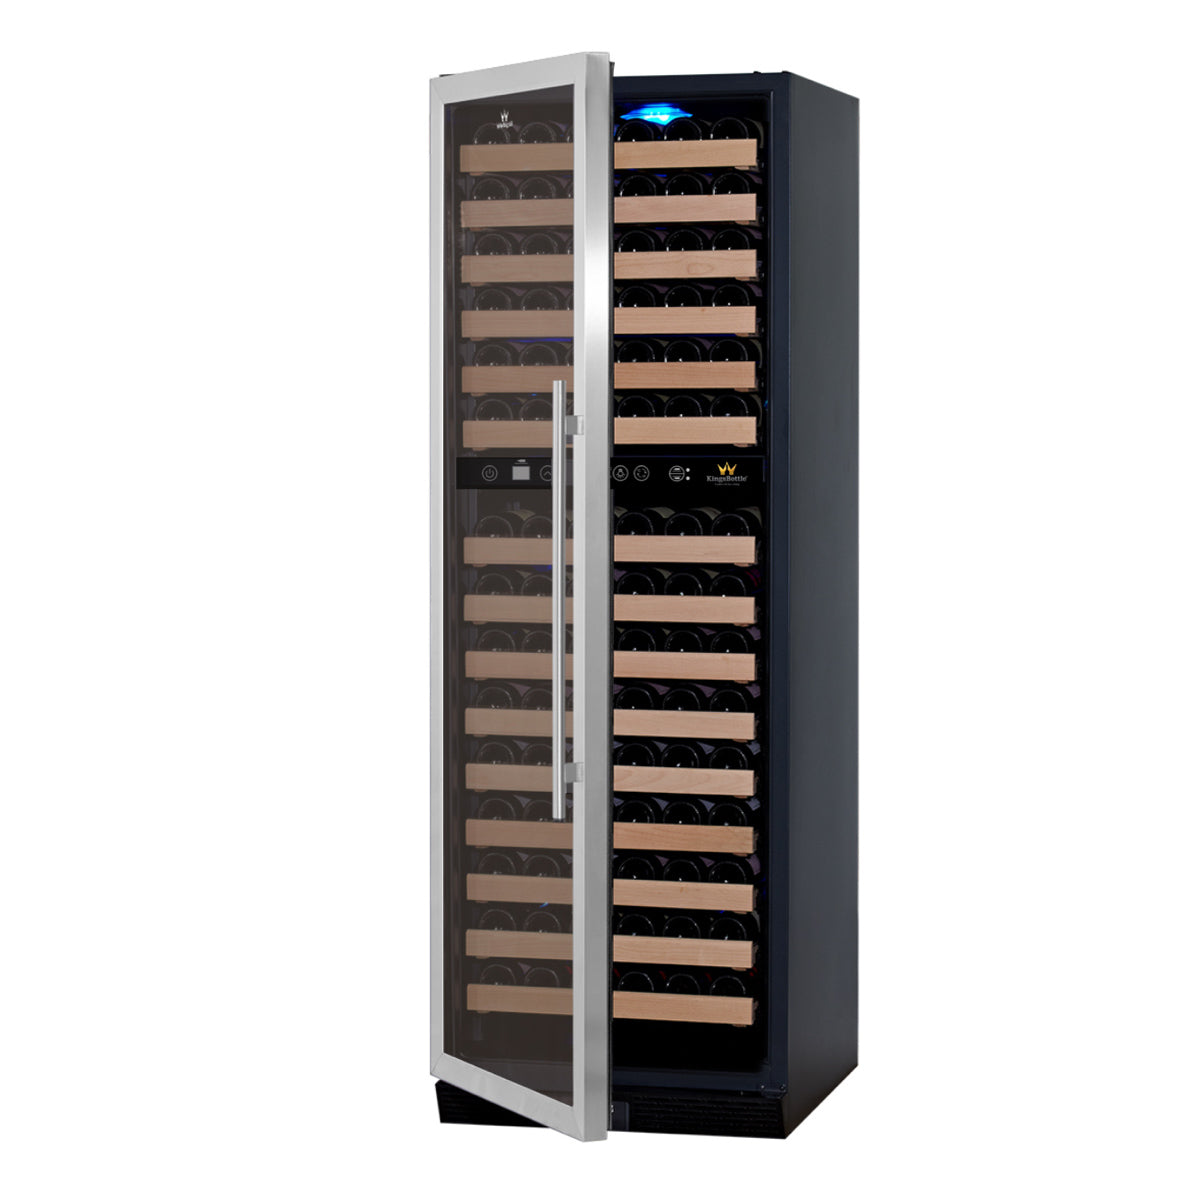 A wine cooler with a glass door and wine bottles inside, offering a generous capacity for storing 164 bottles.